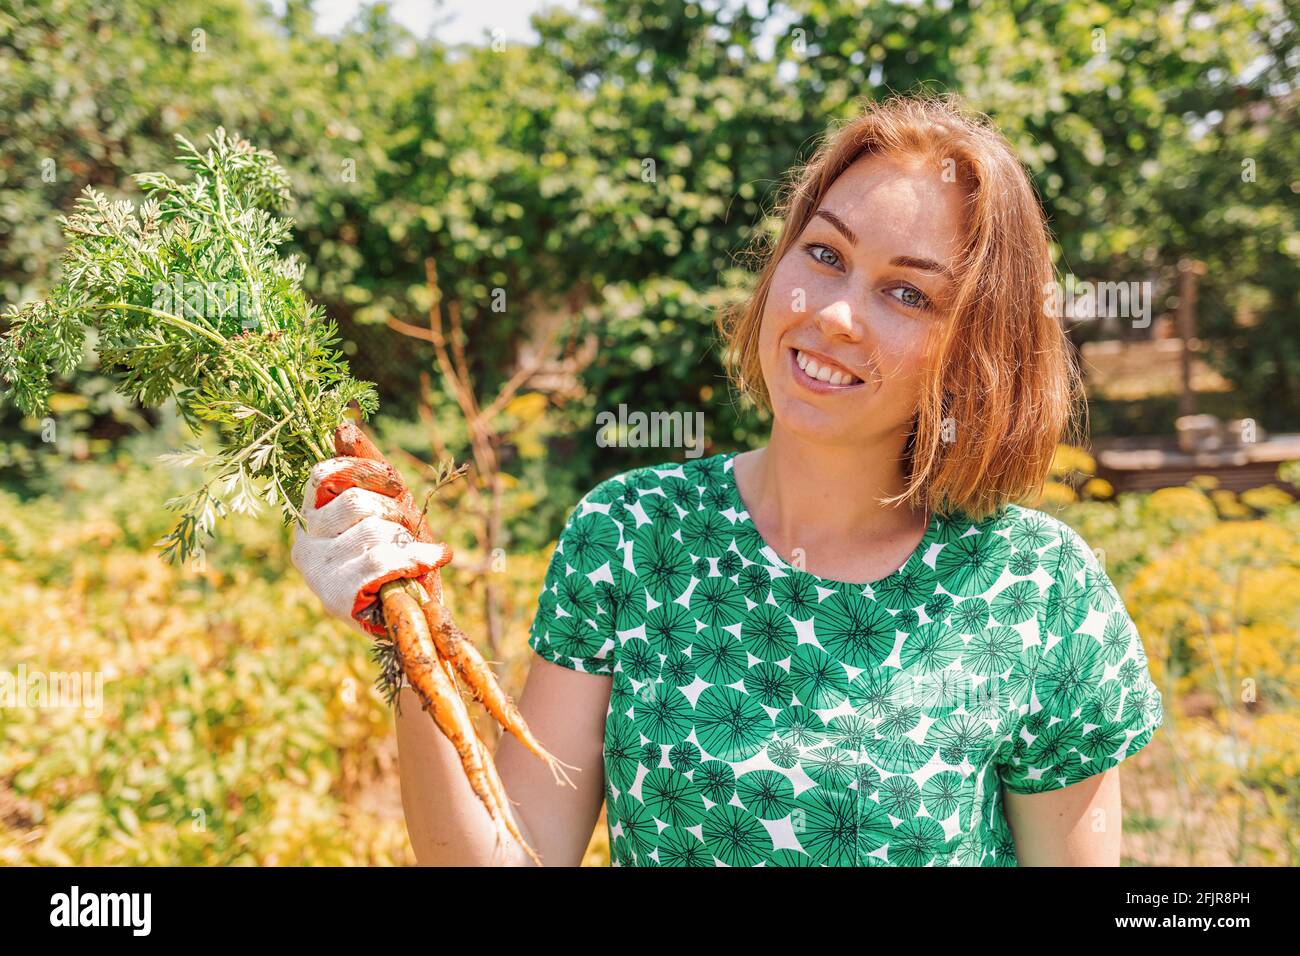 A Caucasian young woman smiles and holds a bunch of freshly picked carrots. Vegetation in the background.Concept of harvesting and gardening. Stock Photo